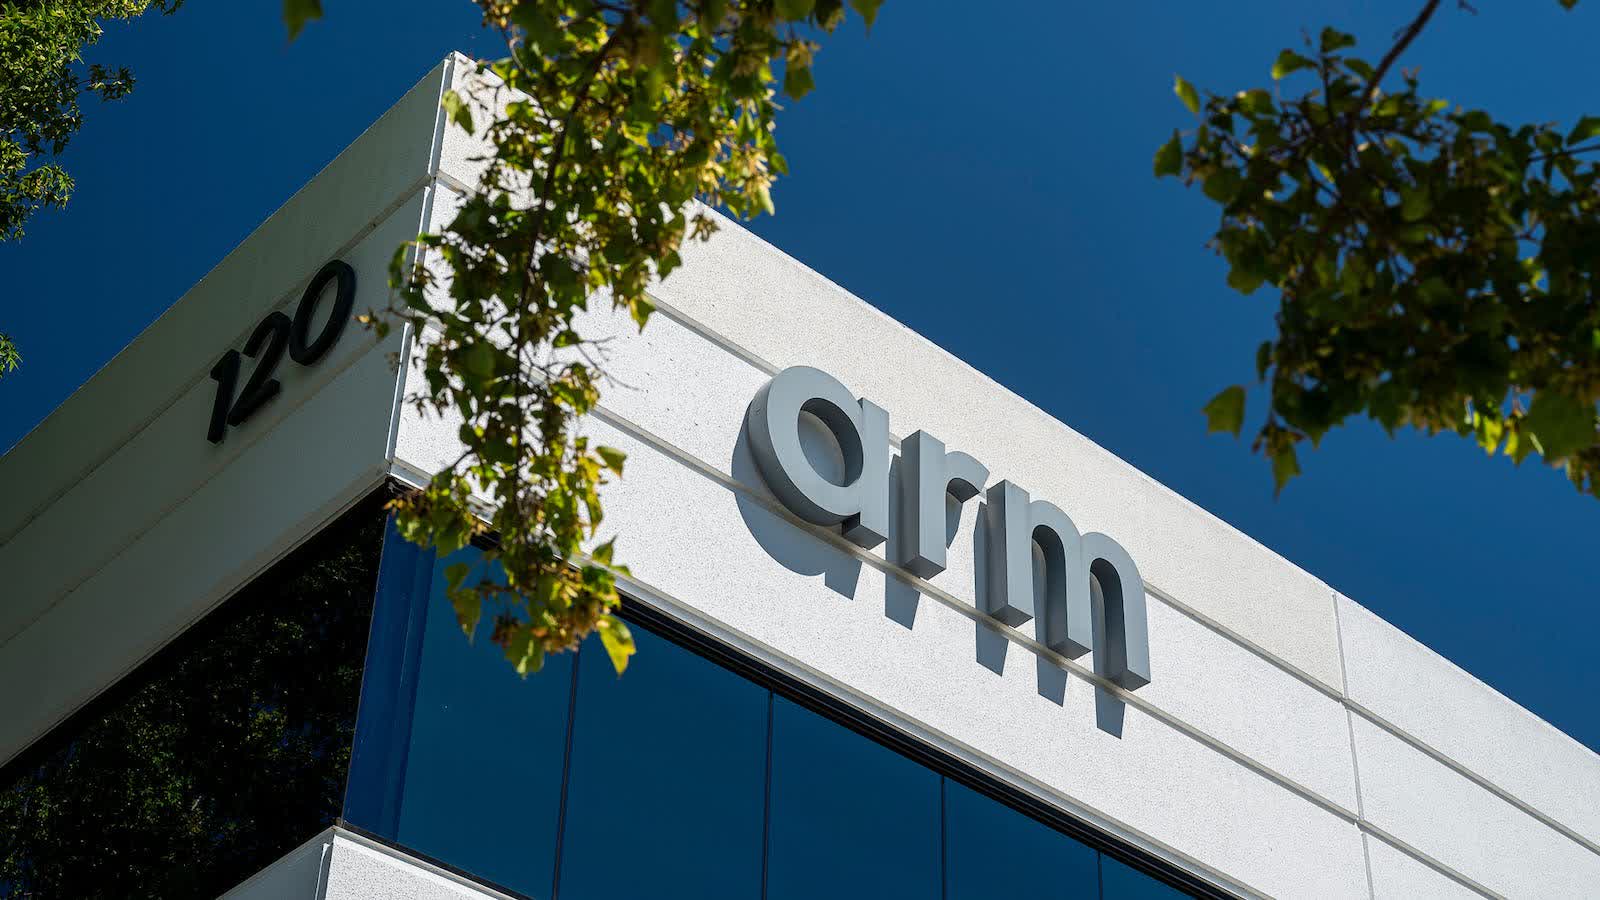 Arm acquires minority stake in single-board computer maker Raspberry Pi